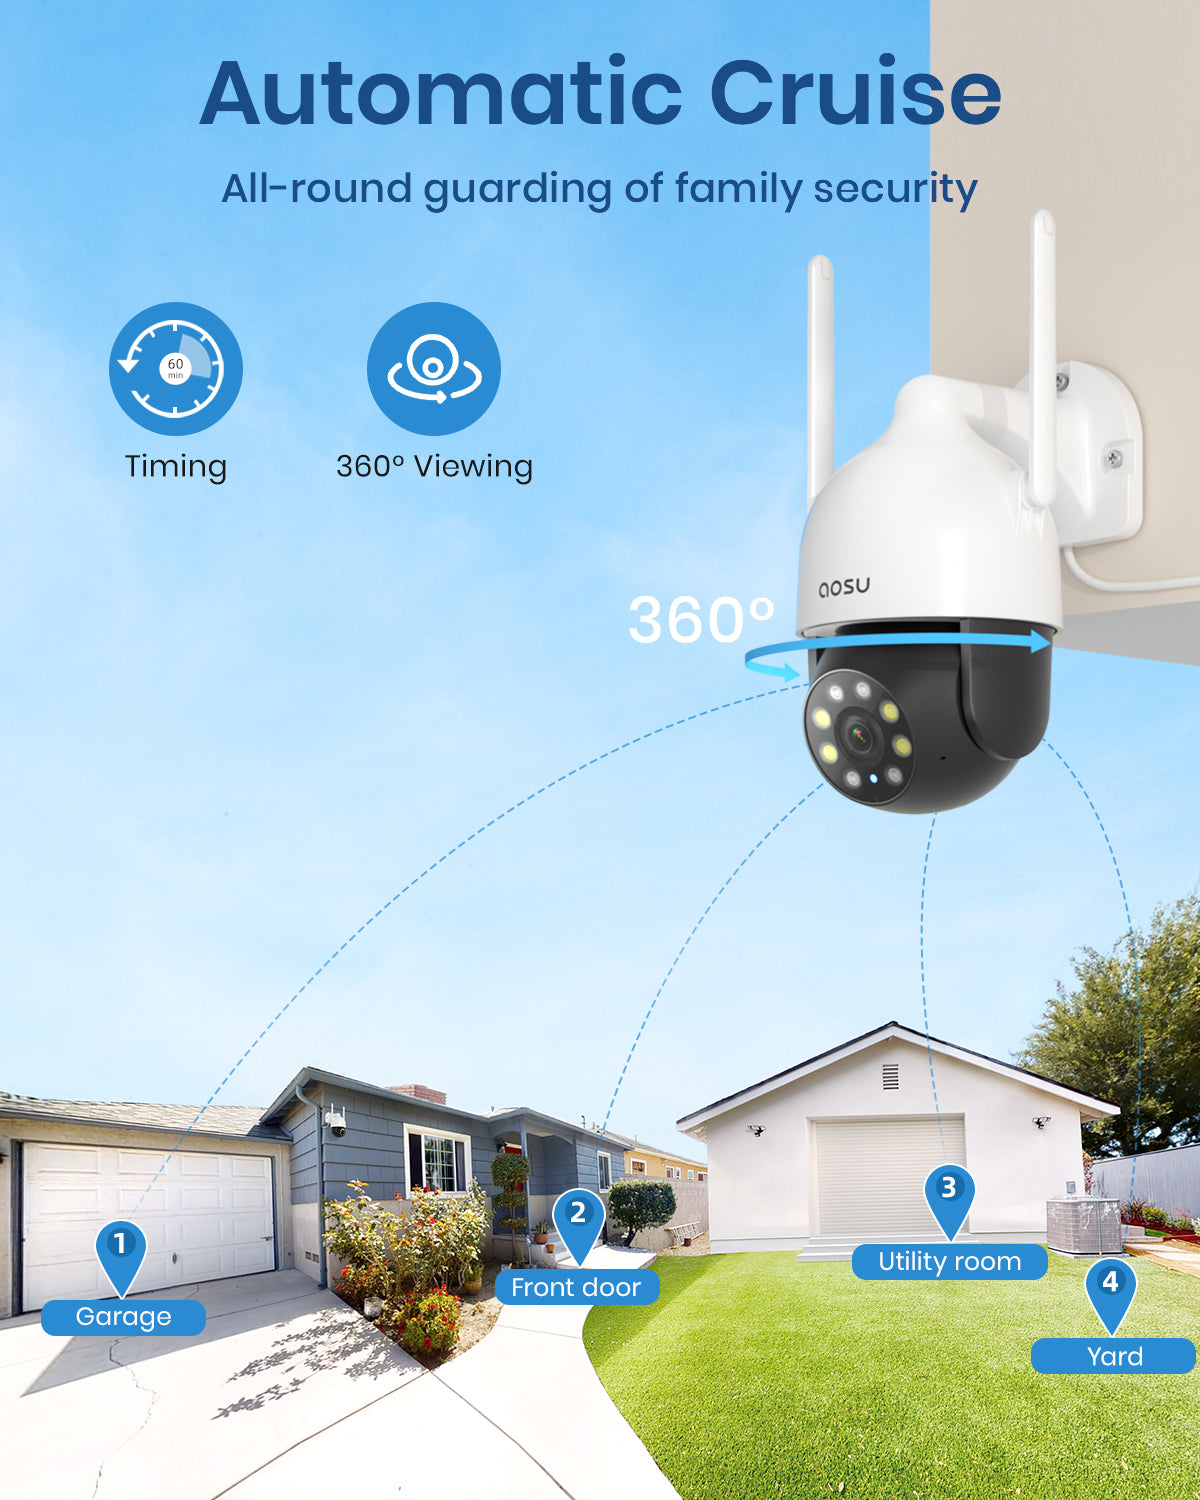 automatic cruise - all-round guarding of family security